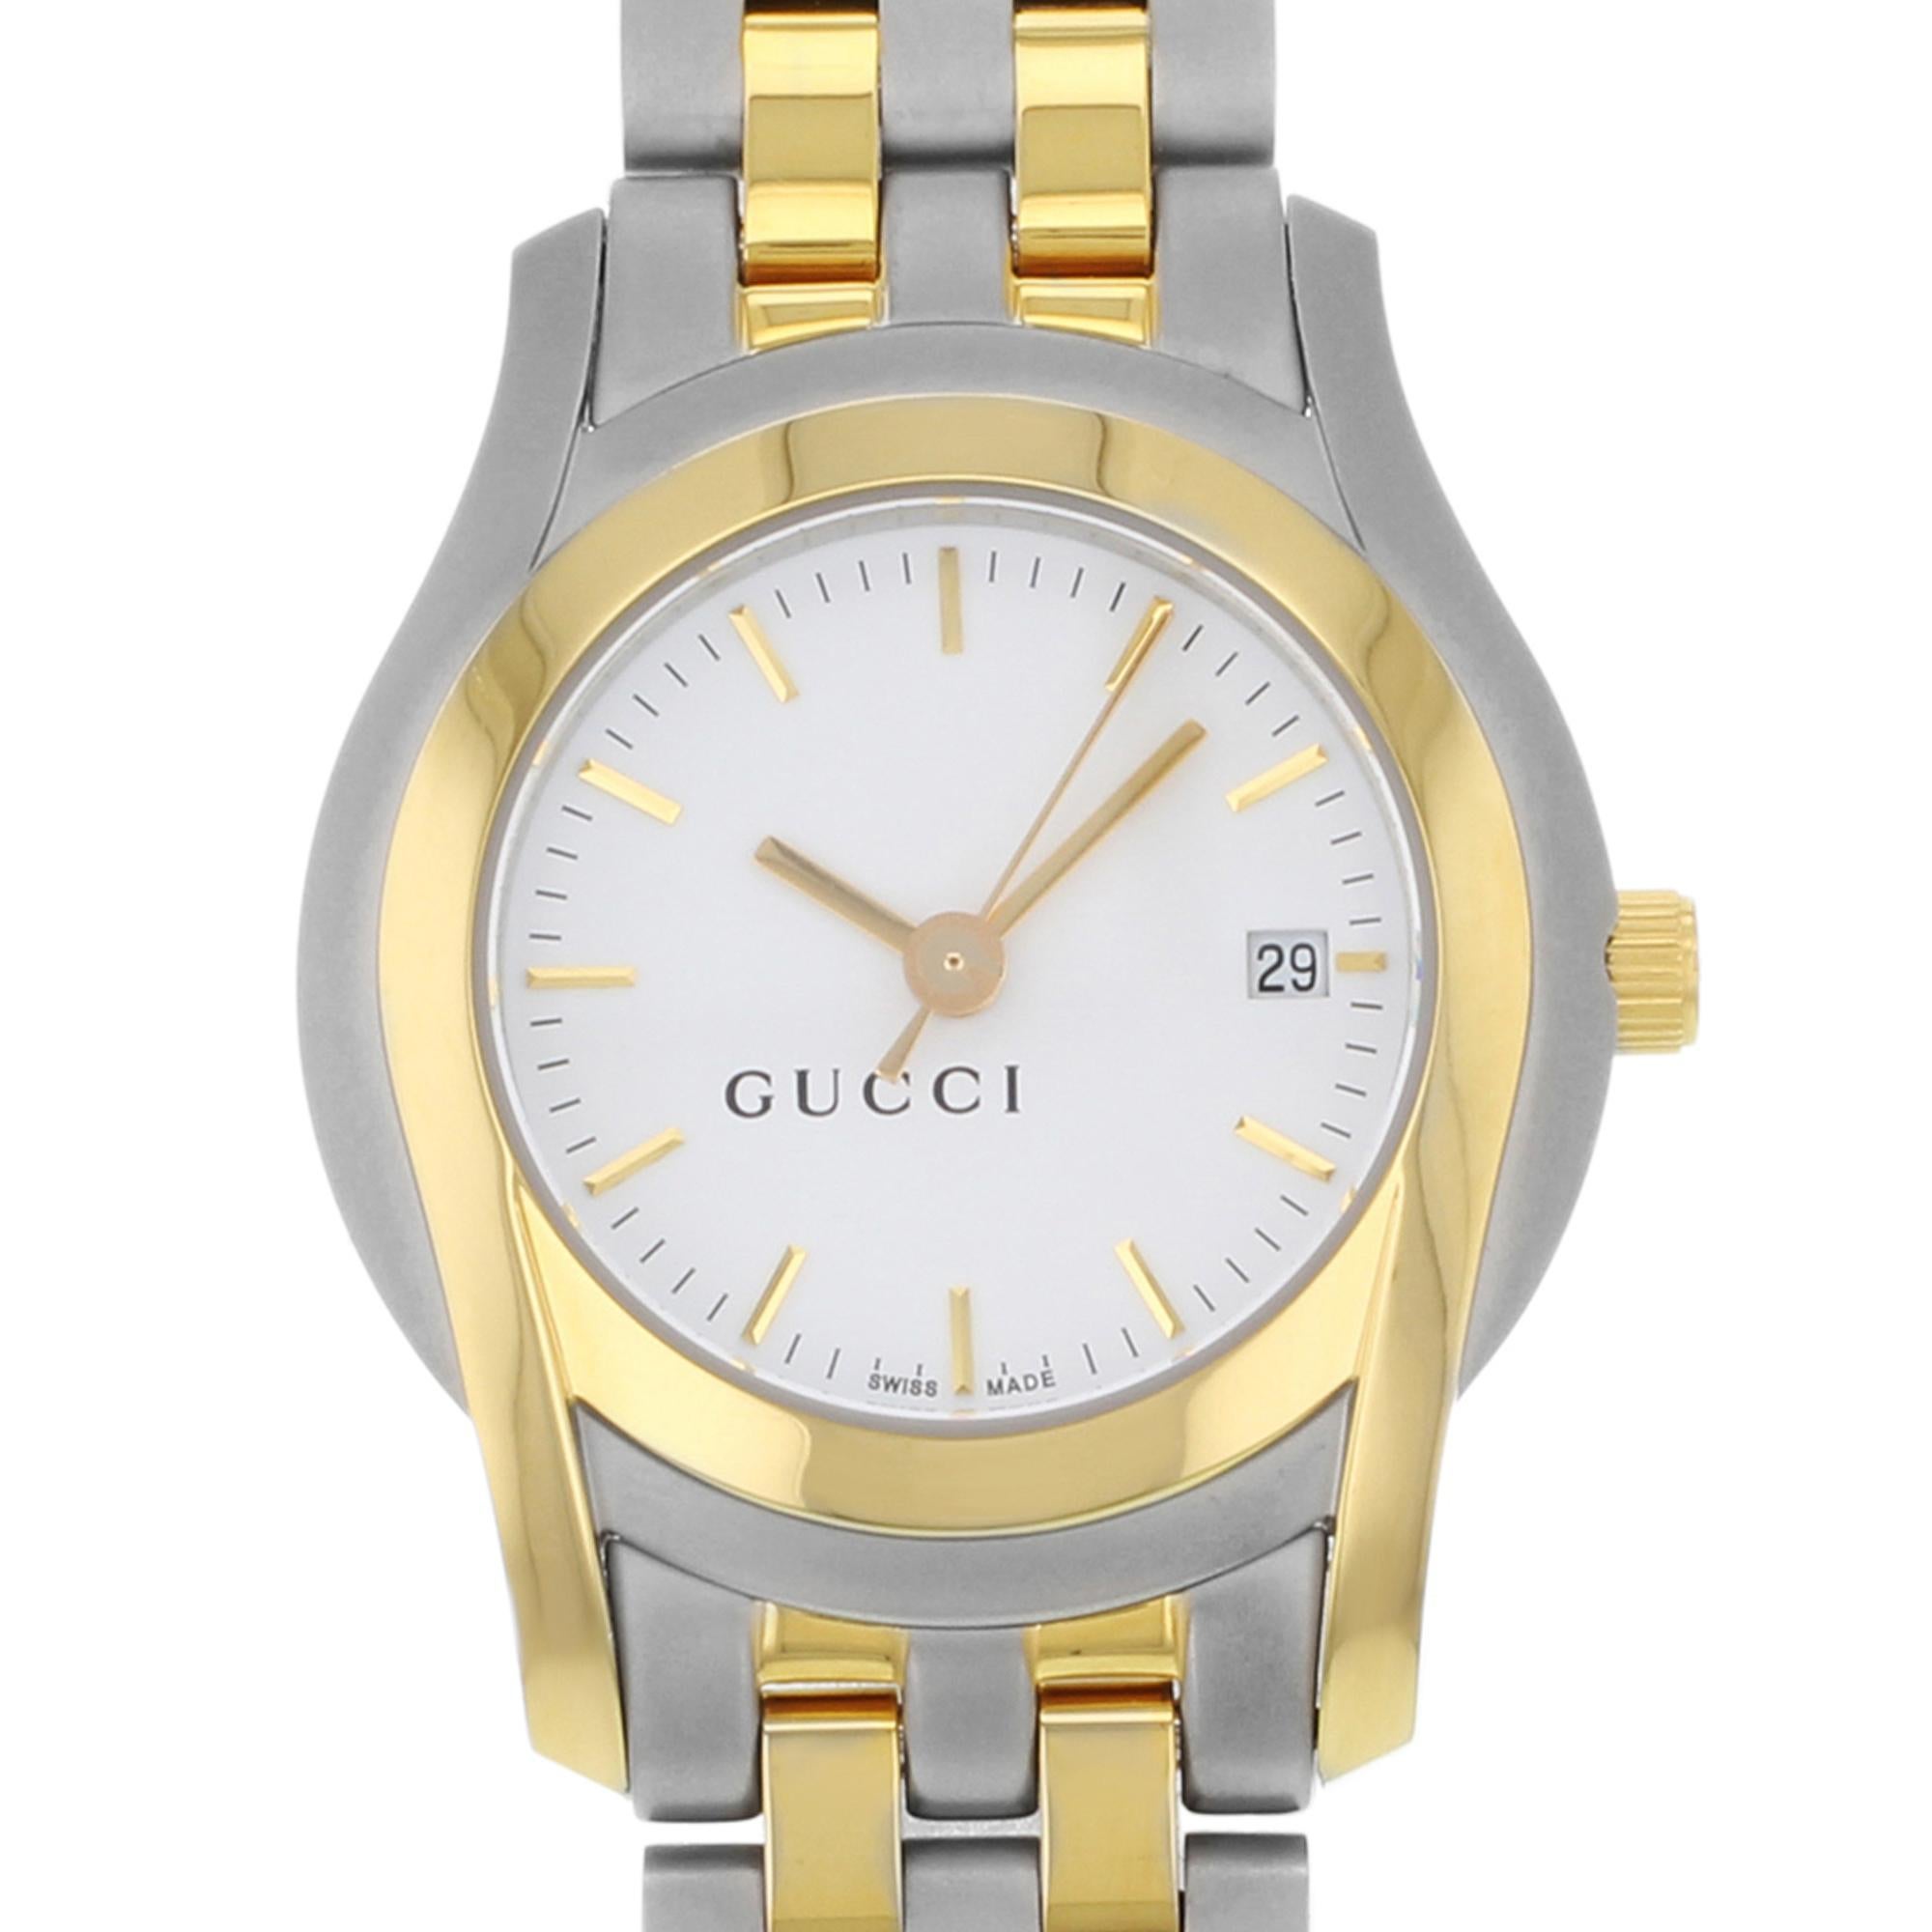 This pre-owned Gucci 5500L YA055528 is a beautiful Ladies timepiece that is powered by a quartz movement which is cased in a stainless steel case. It has a round shape face, date dial and has hand sticks style markers. It is completed with a